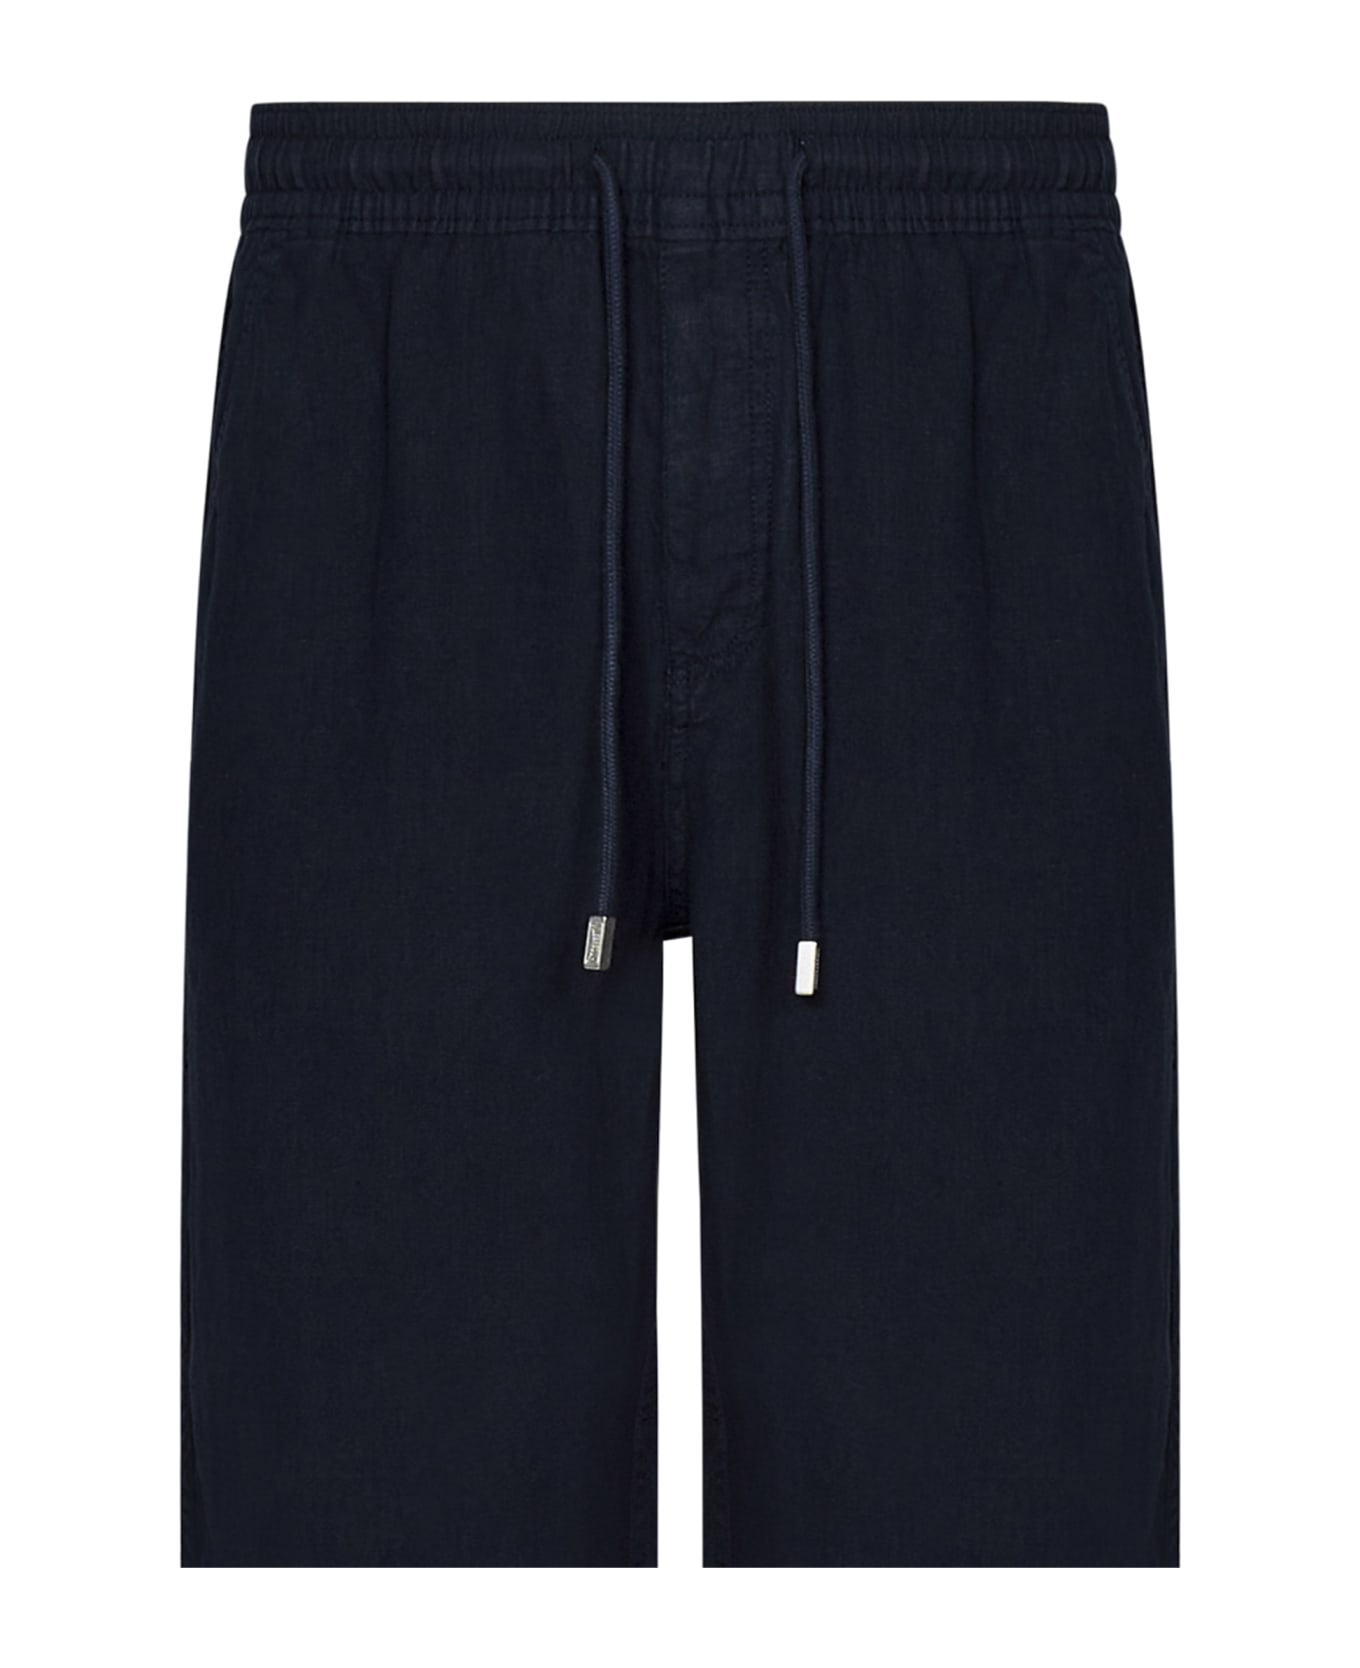 Vilebrequin Pacha Trousers - Blue